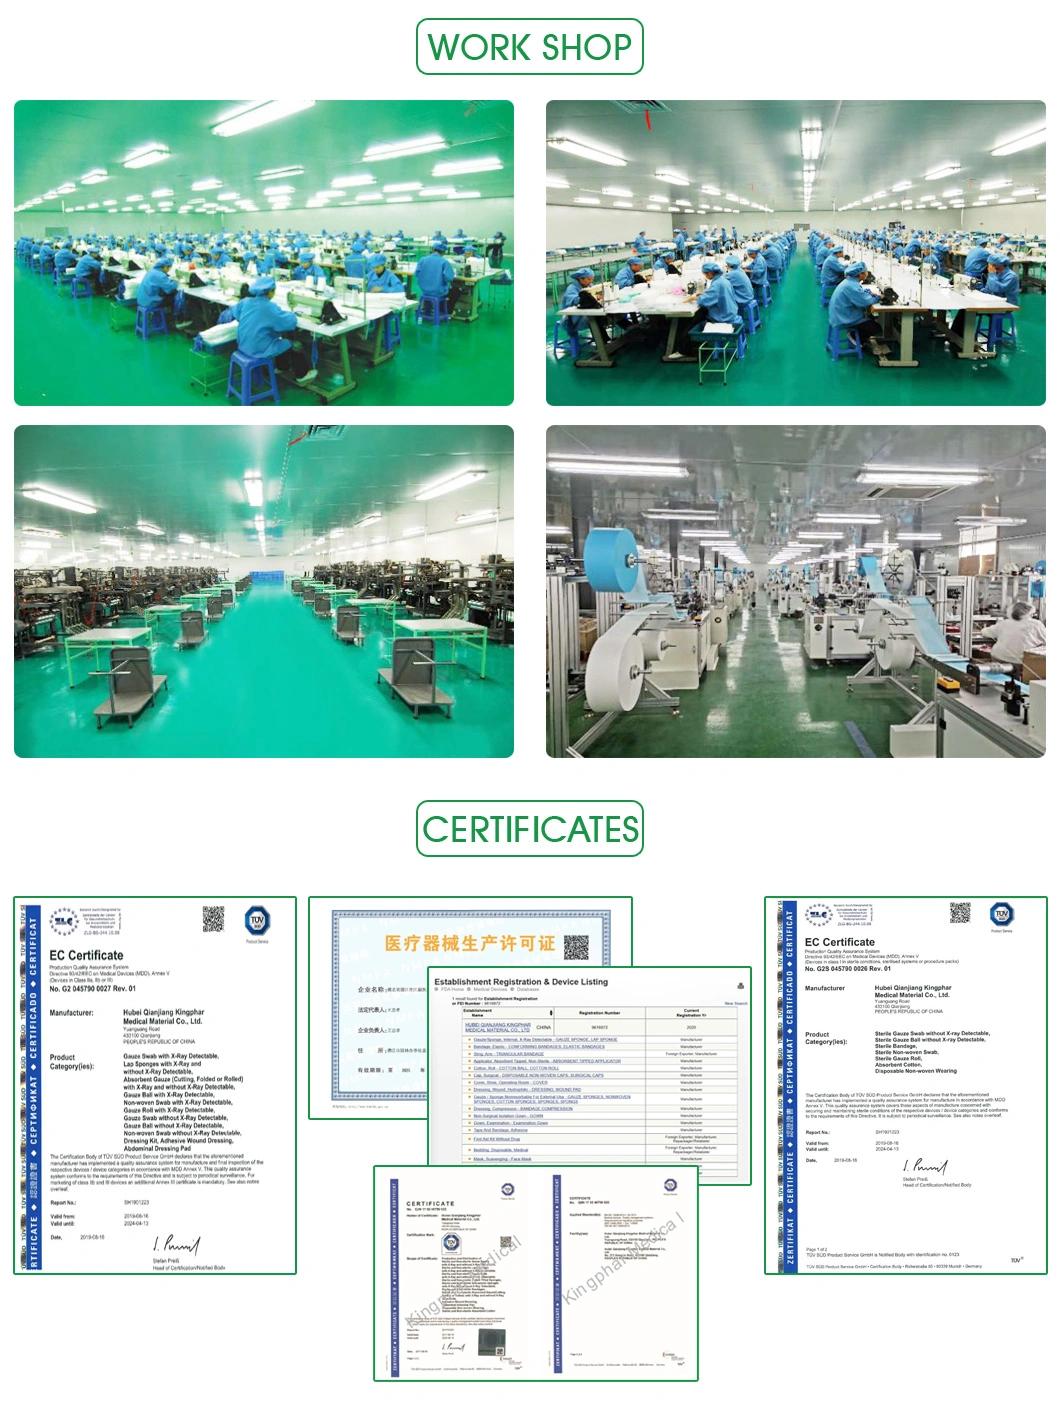 China Factory Custom Hydrocolloid Pimple Patch